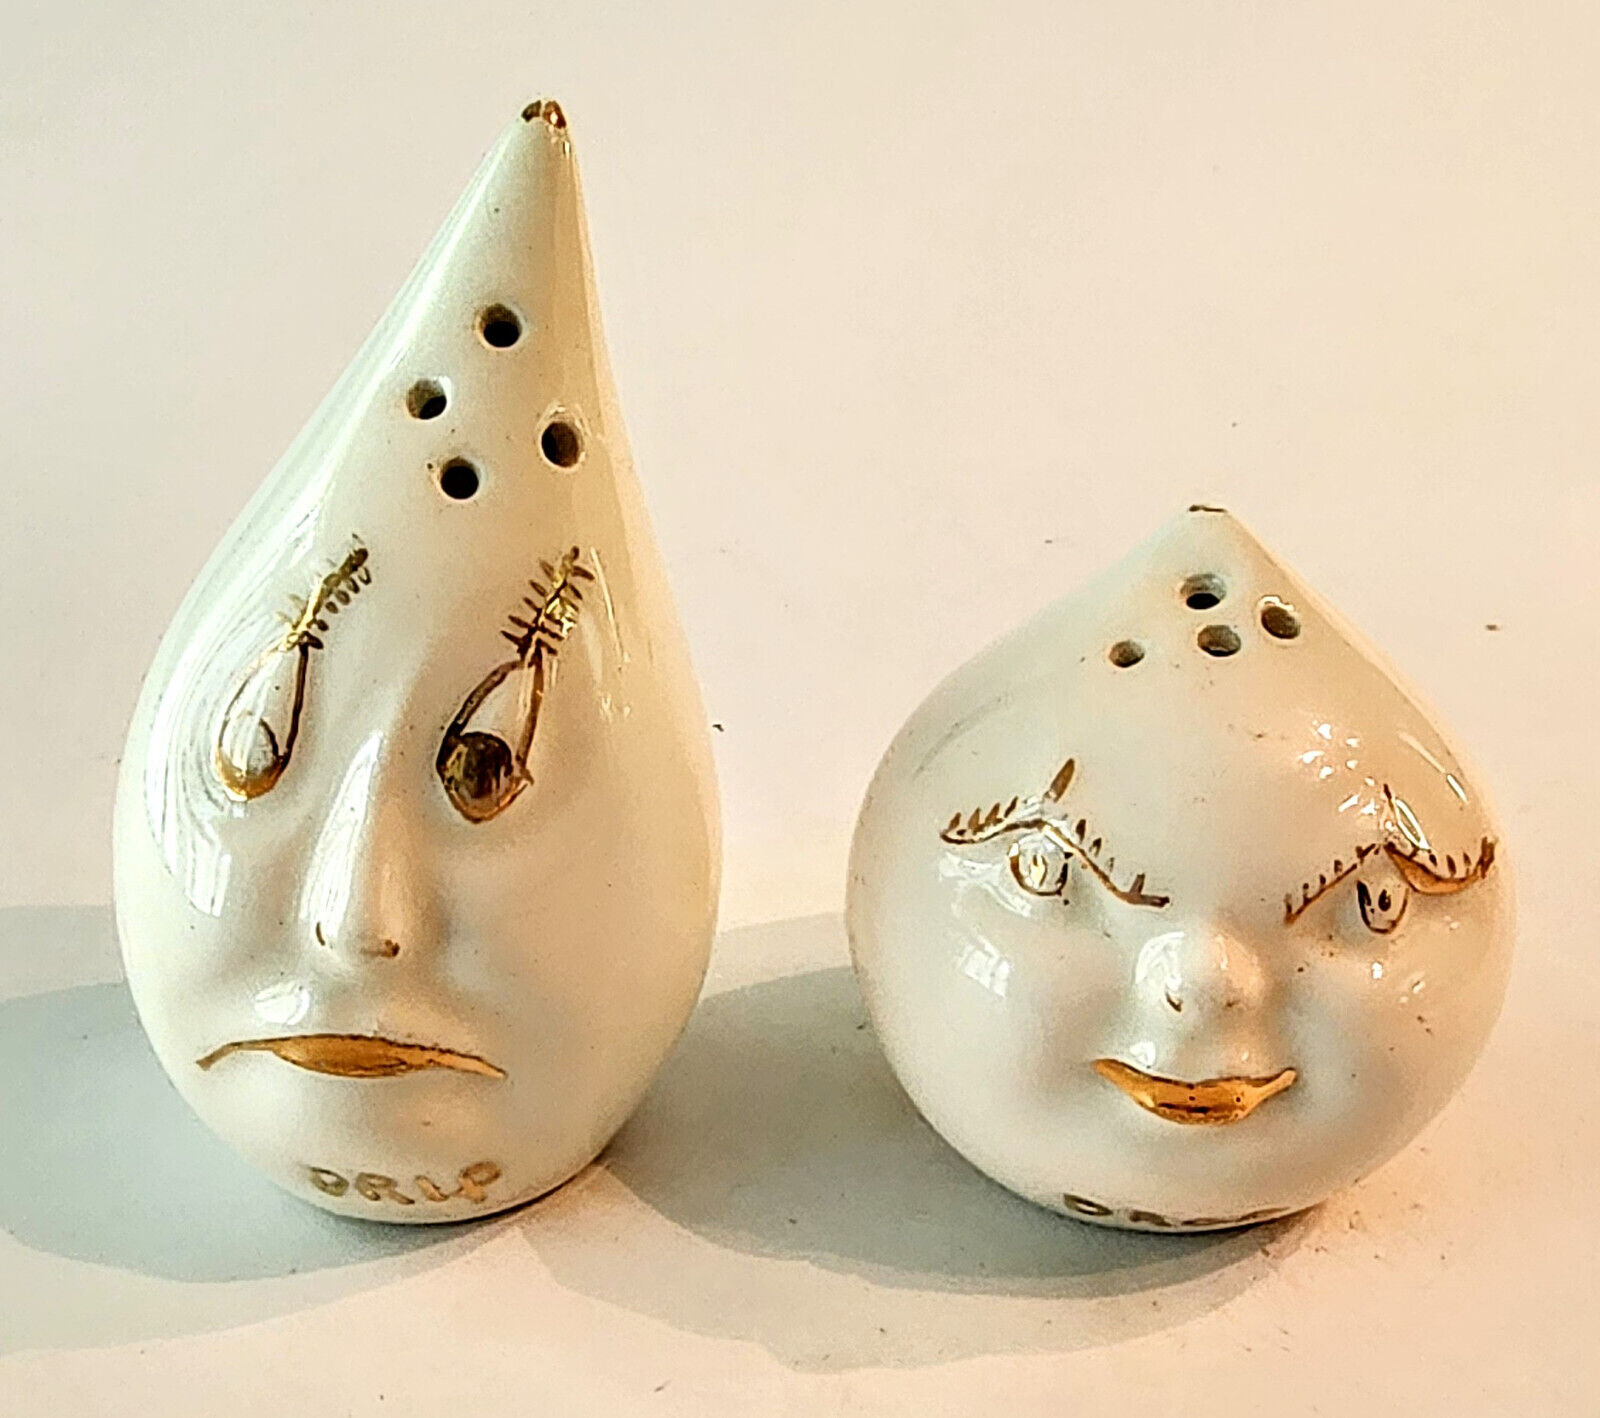 Vintage 50's Signed Drip & Drop Salt and Pepper Shakers Gold on White Ceramic